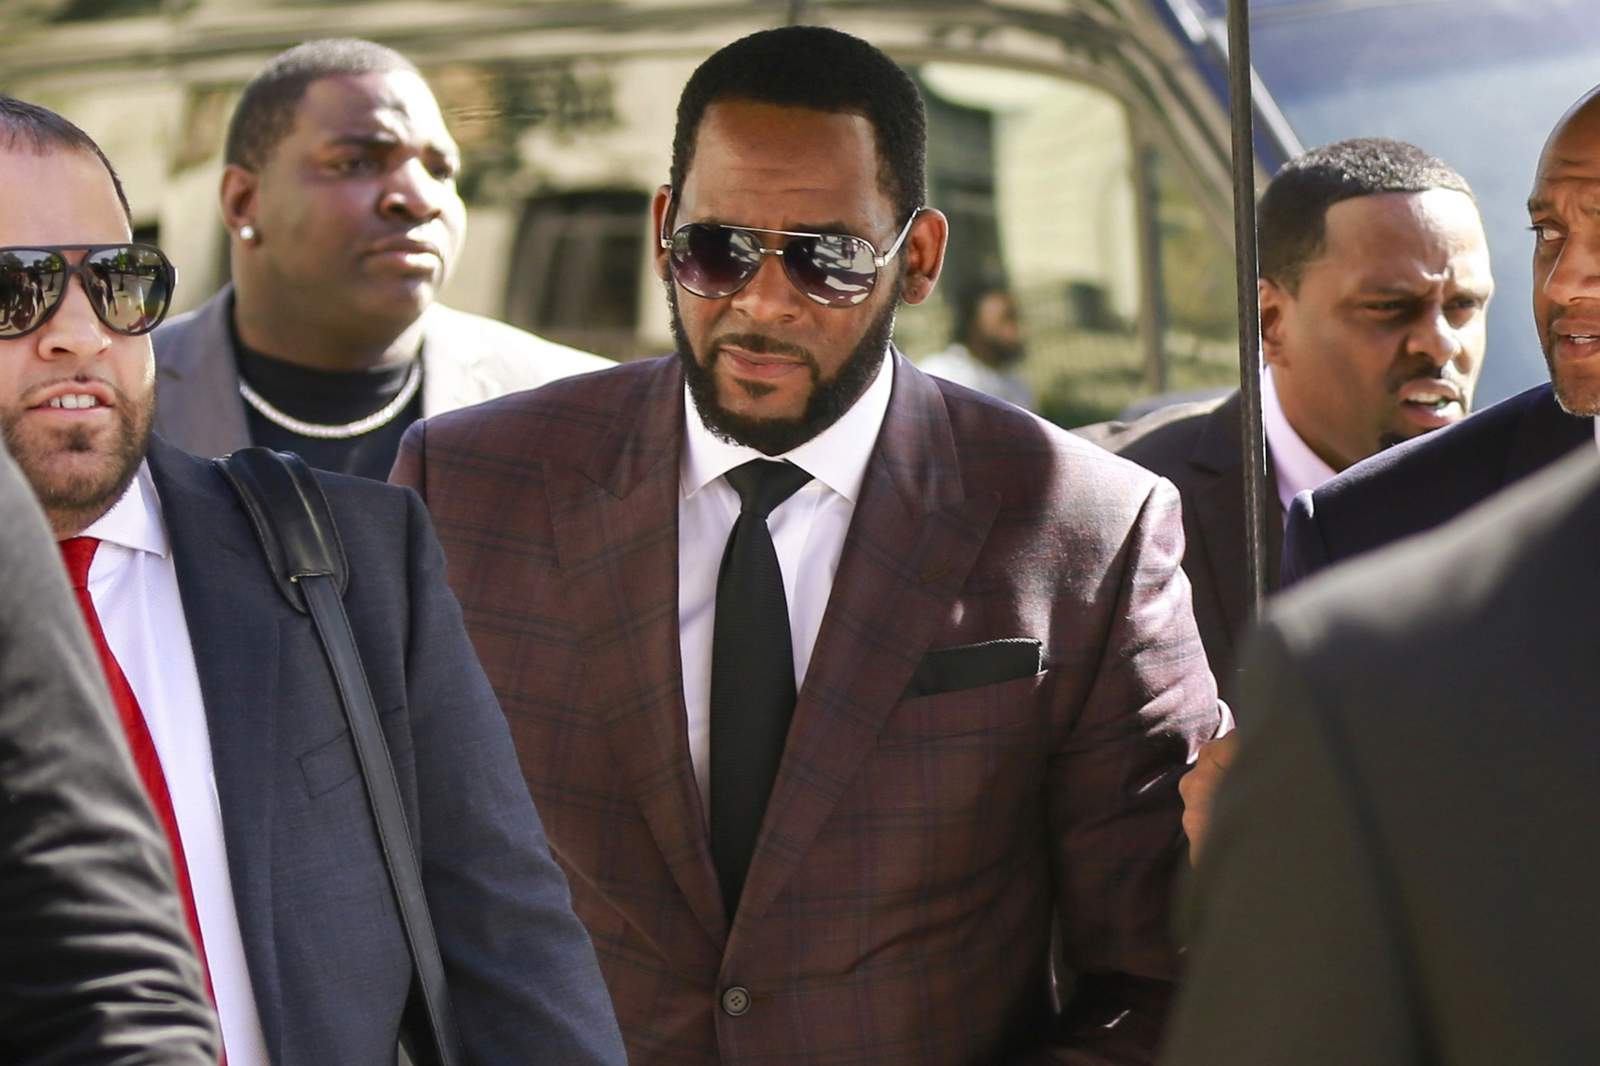 R. Kelly's manager charged with phone threats to theater